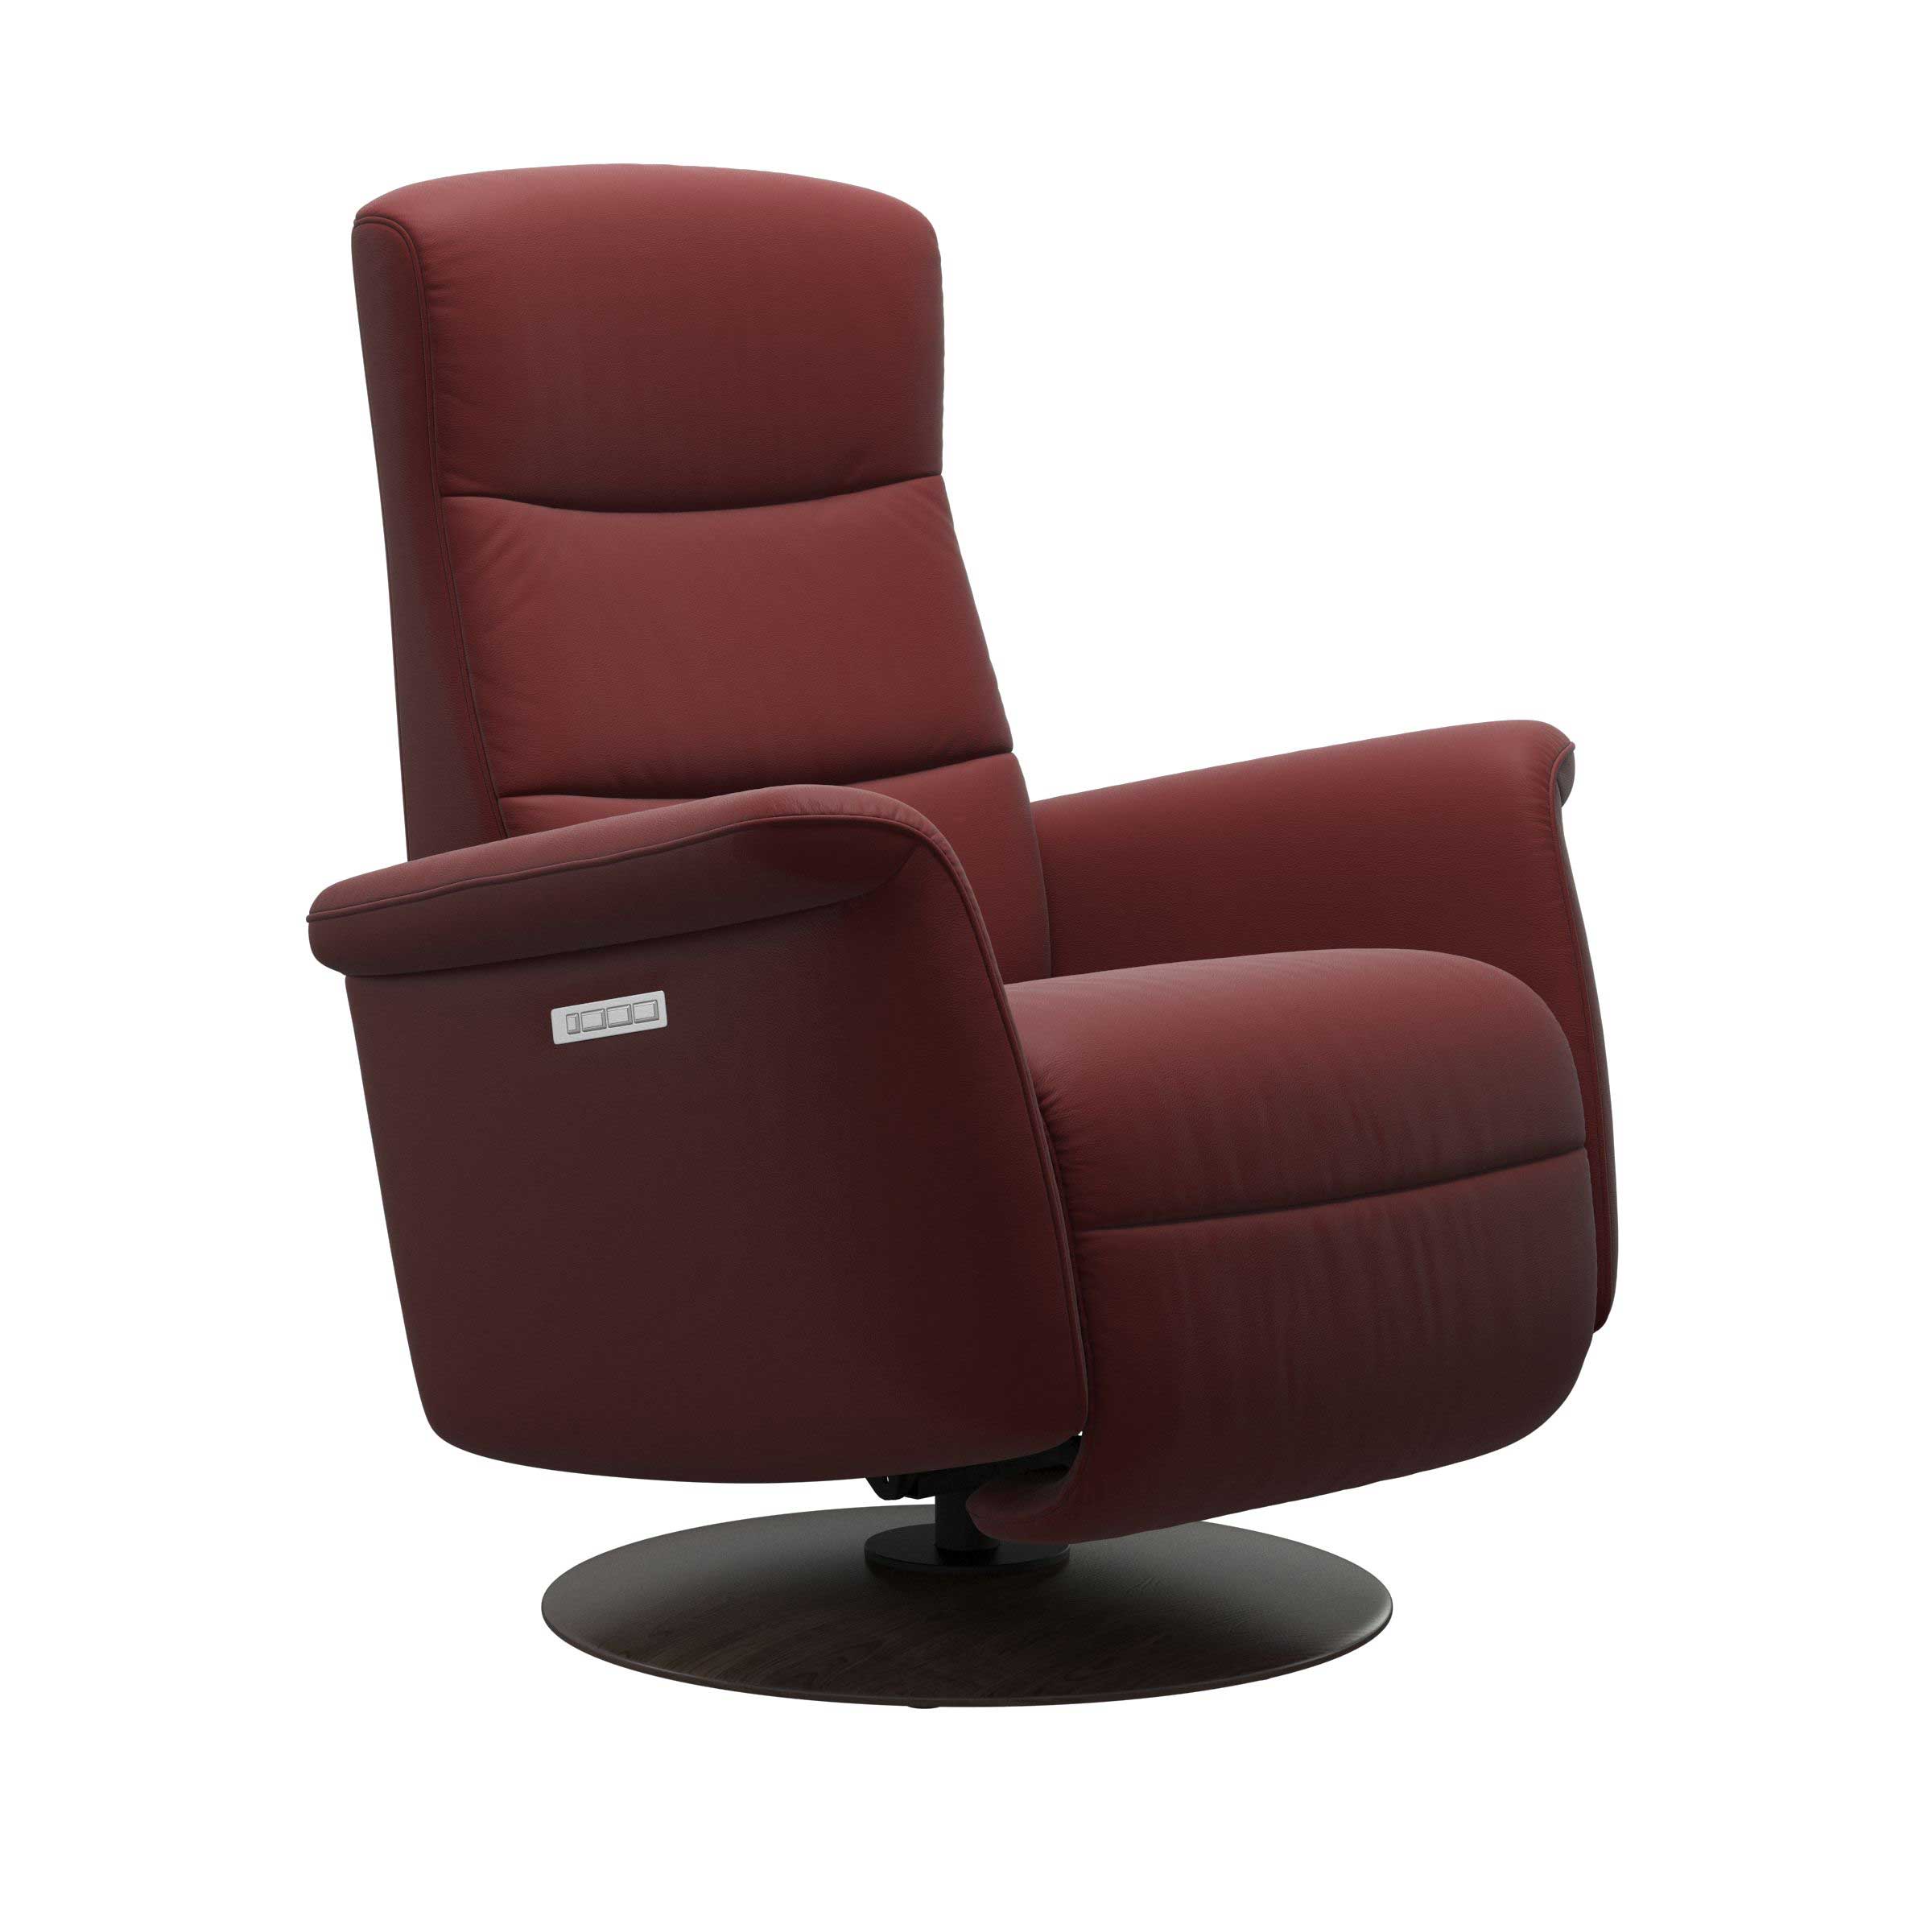 Stressles_Mike_Large_Recliner_Red_Leather